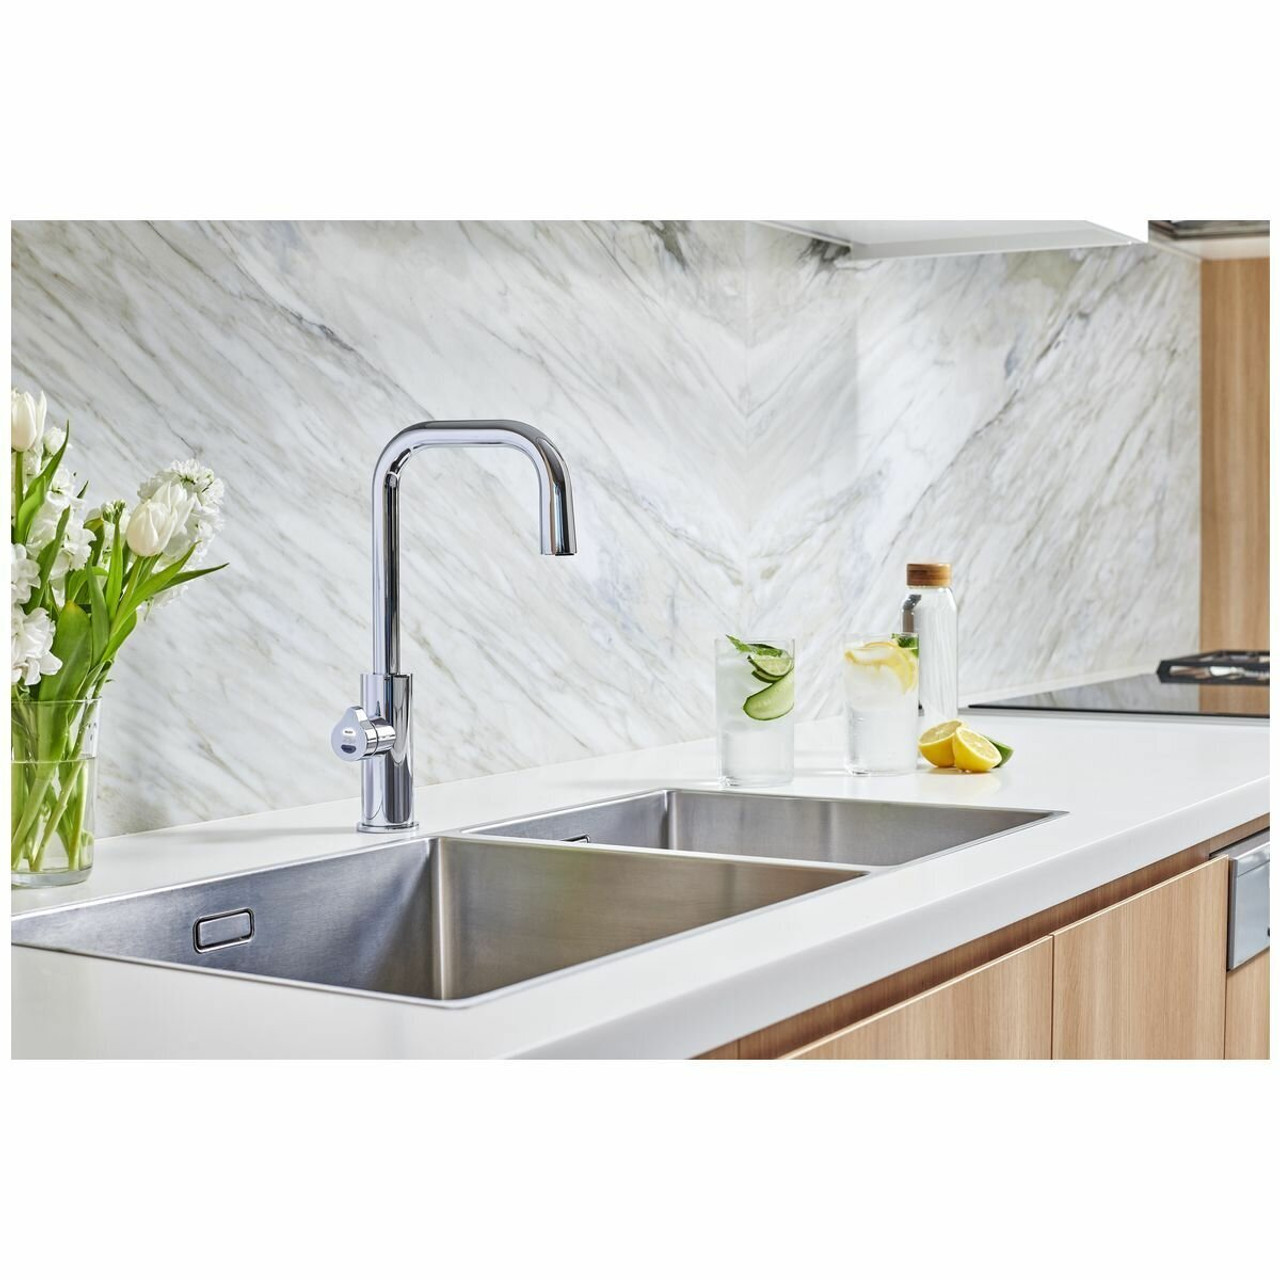 H5C783Z00AU - Zip HydroTap G5 Home Cube Plus Boiling, Chilled & Sparkling Filtered Tap - Chrome